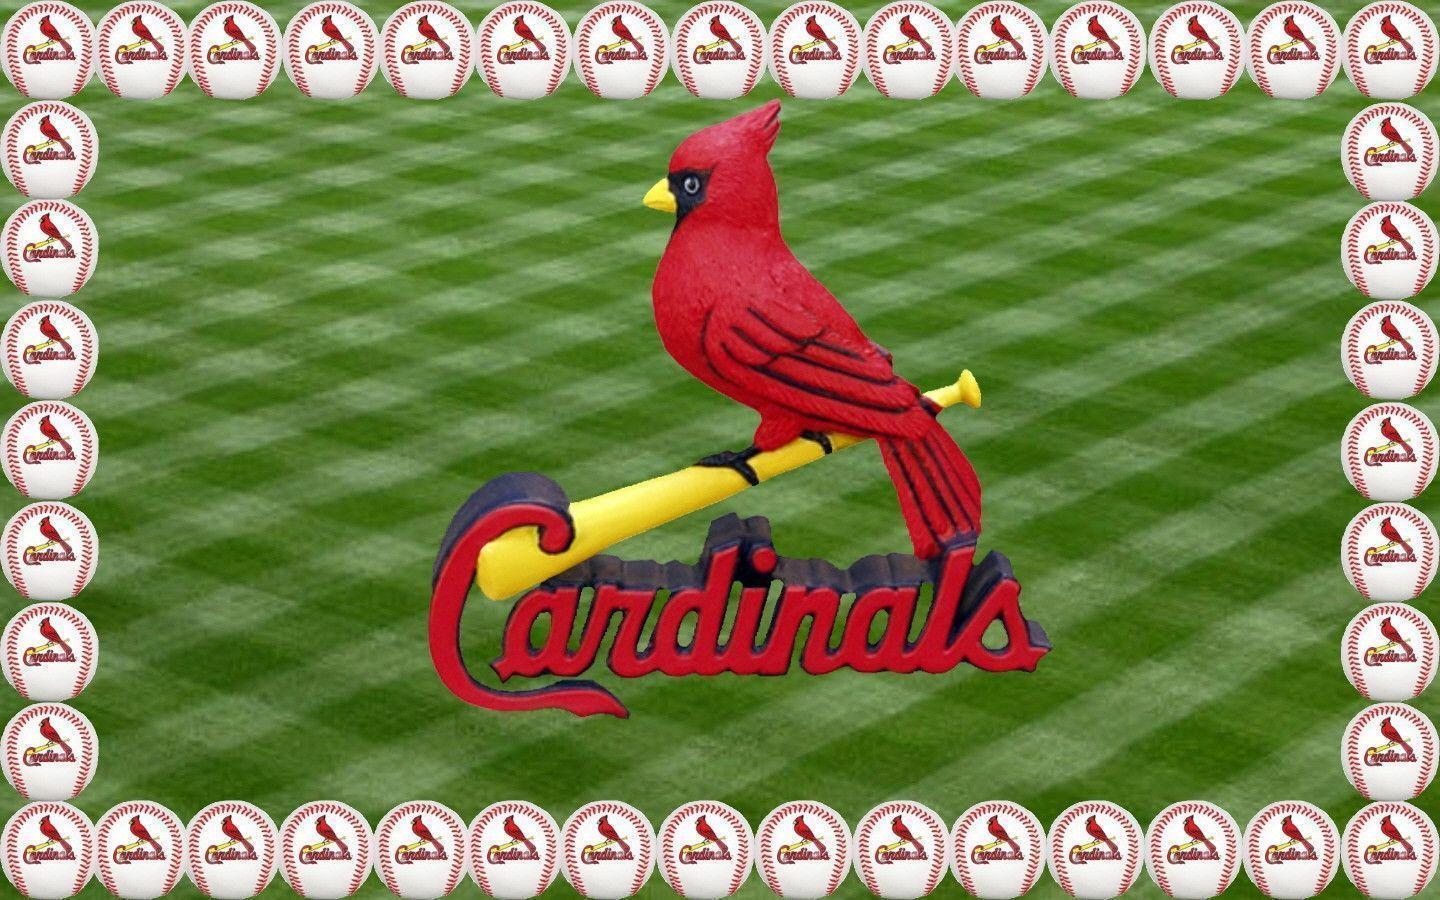 More St. Louis Cardinals wallpapers